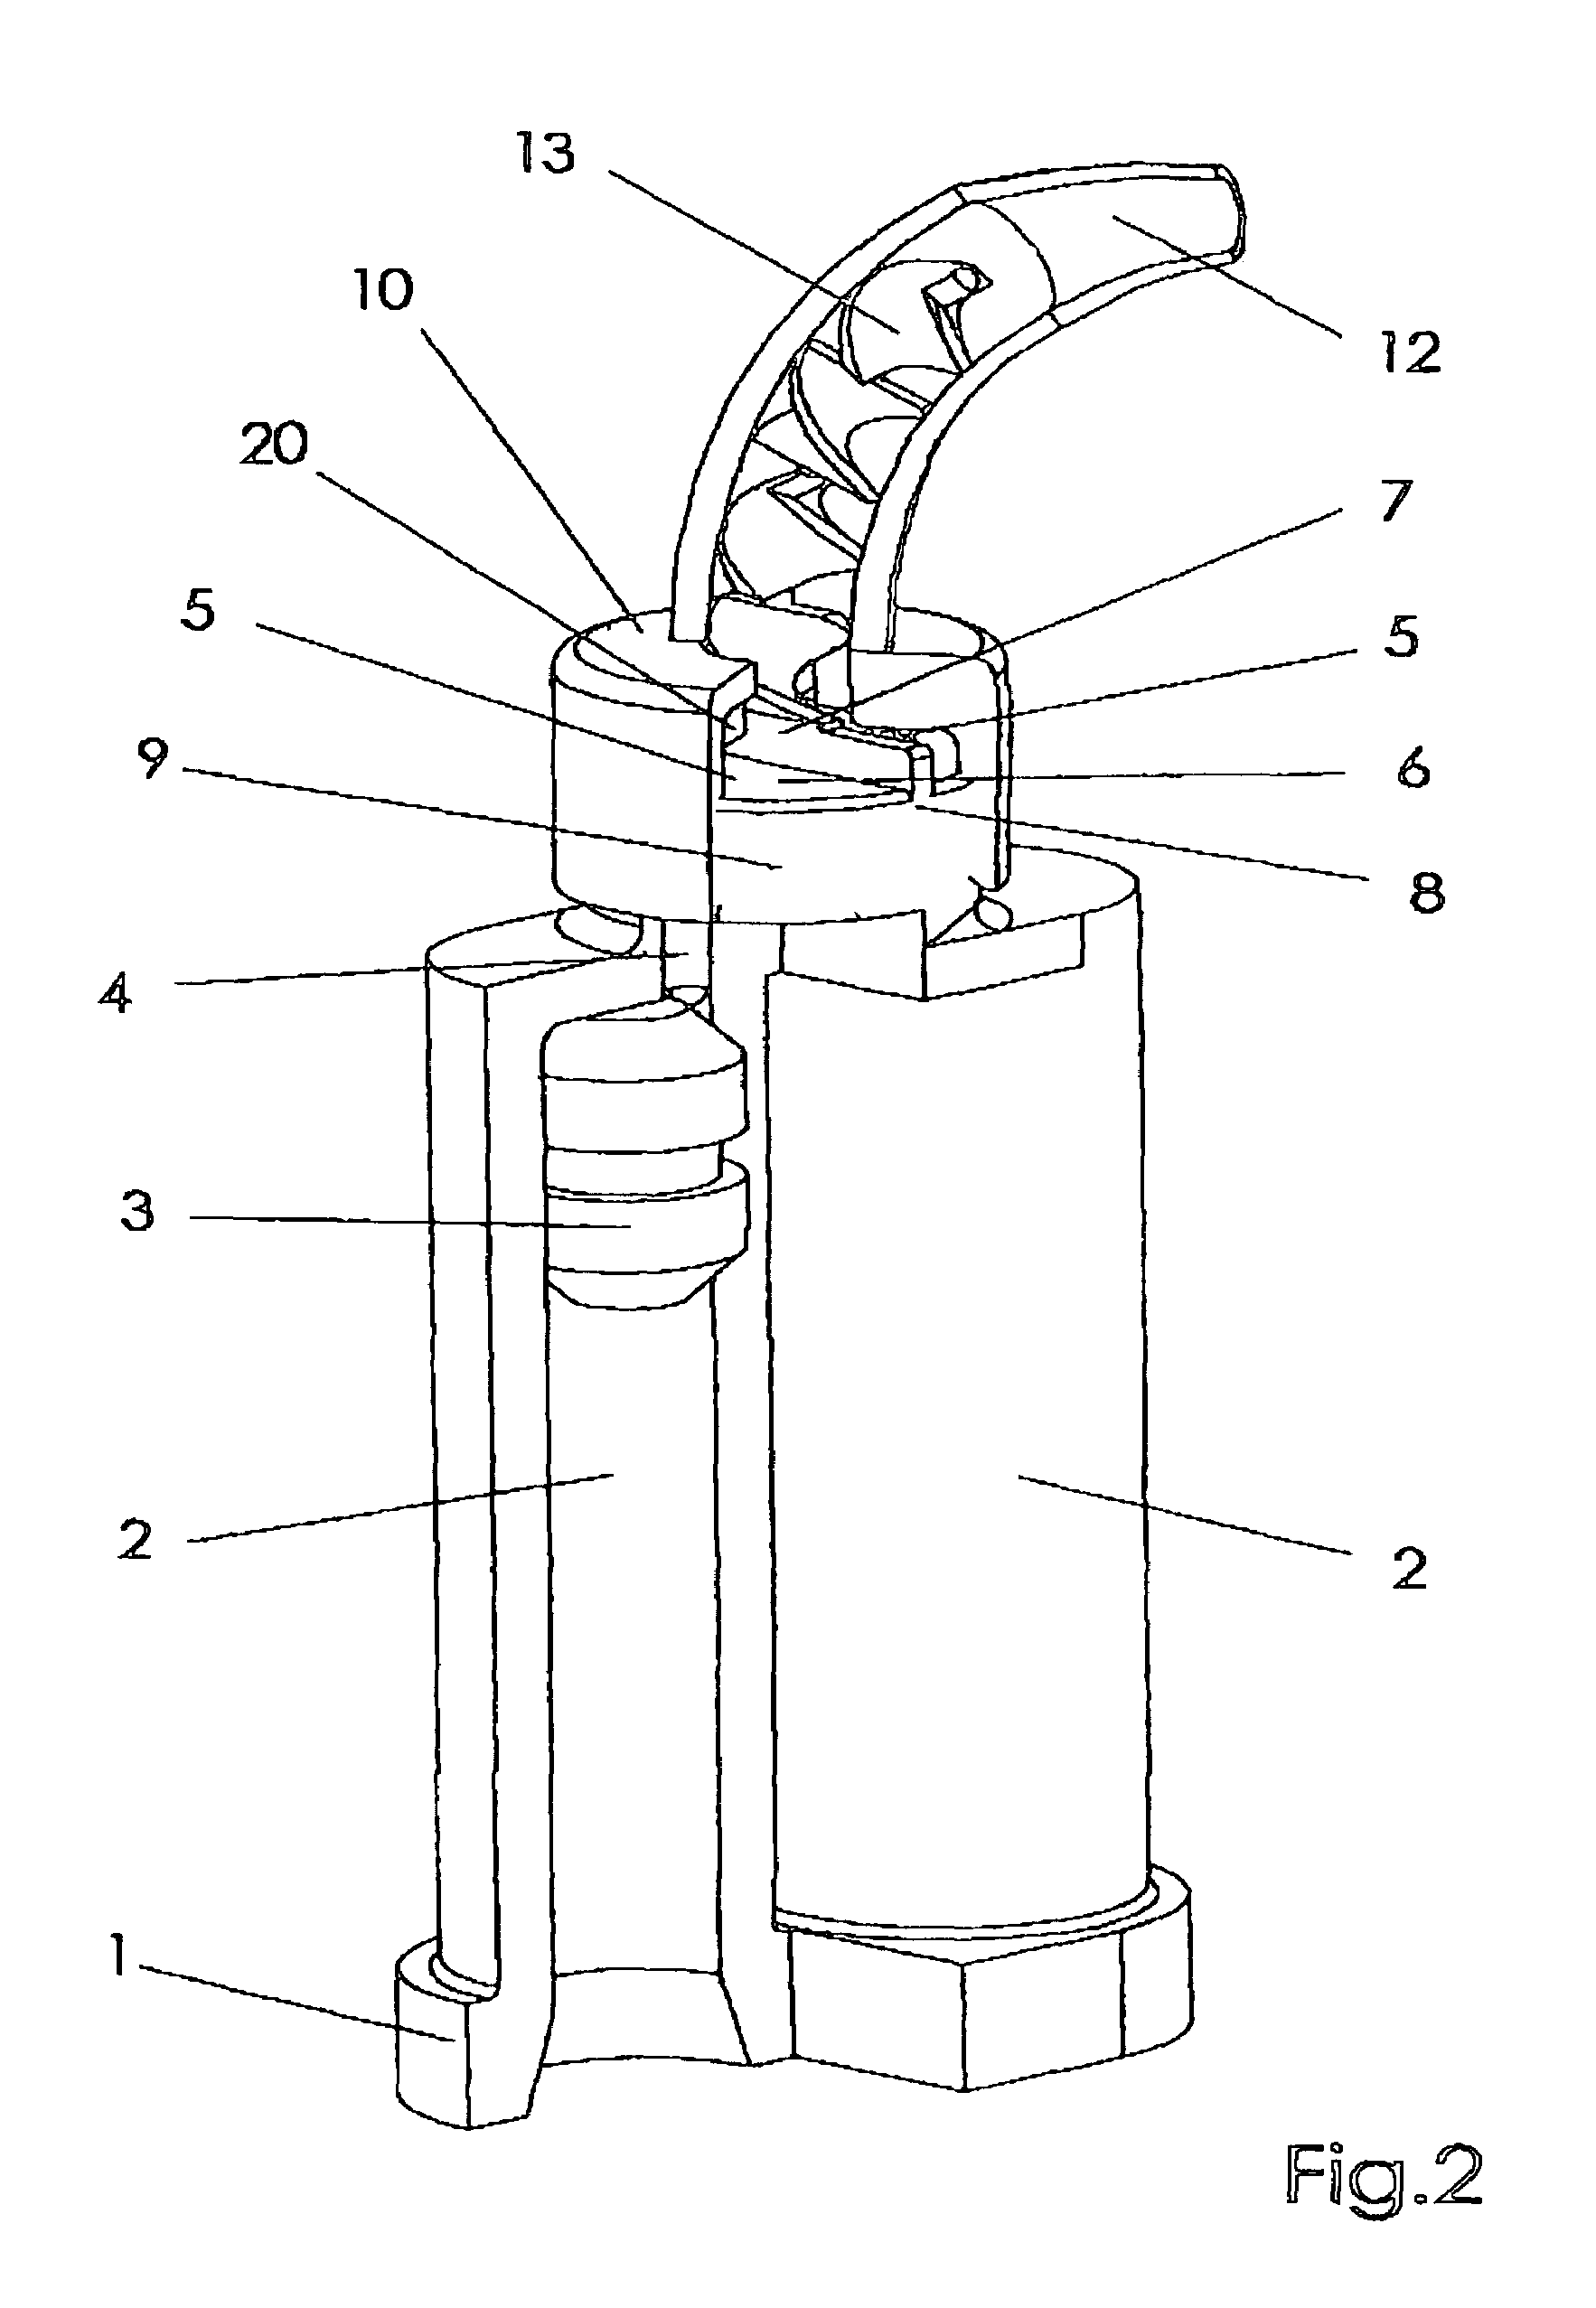 Device for mixing and dispensing multi-component compositions